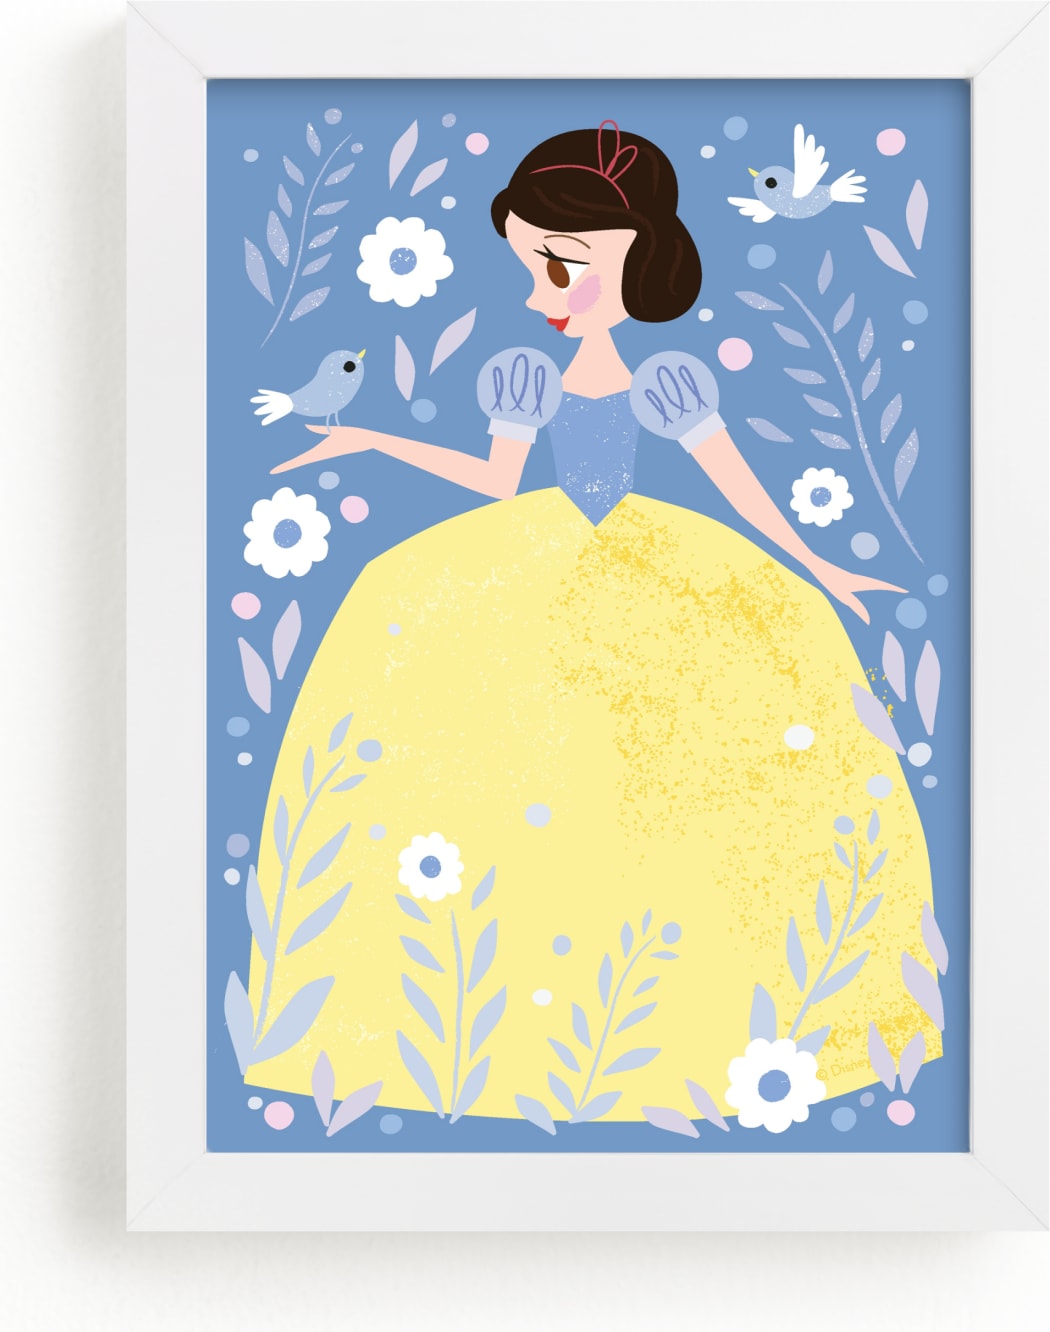 This is a blue disney art by Angela Thompson called Disney Enchanted Snow White.